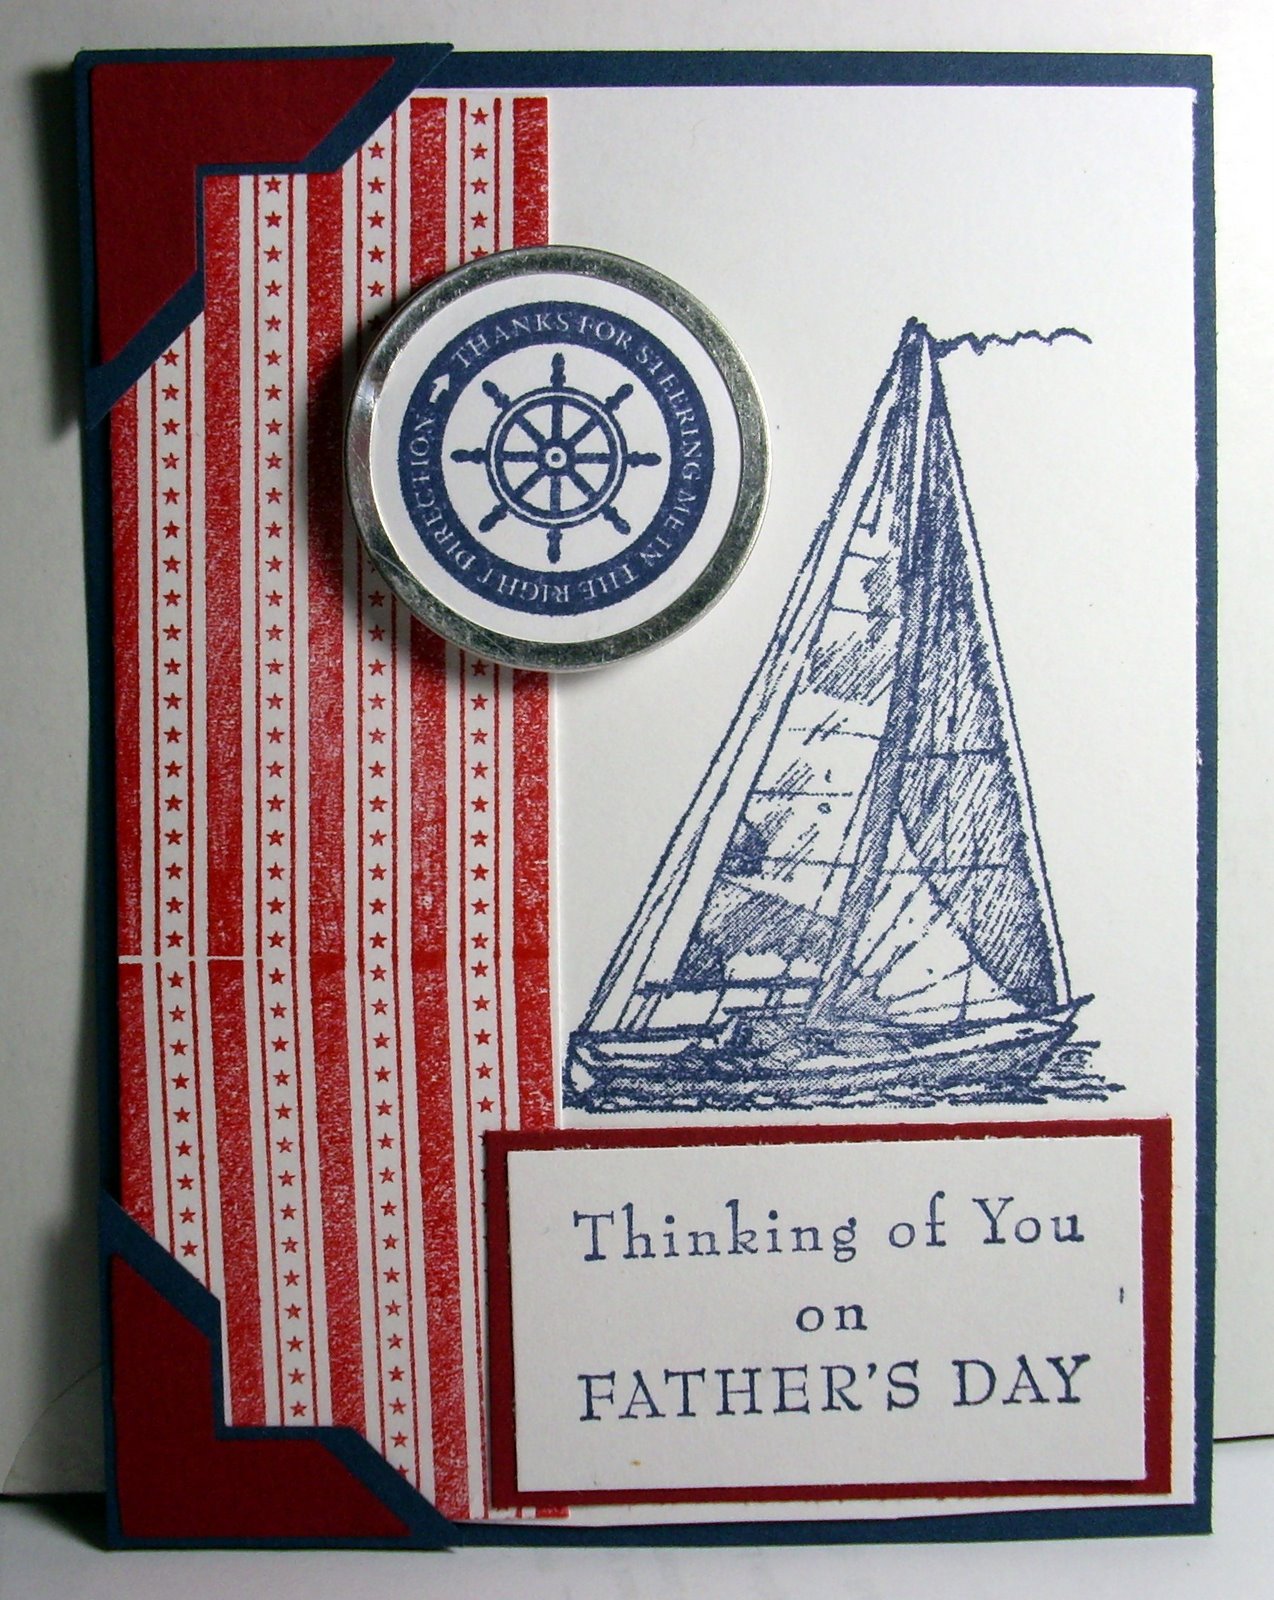 [WSC43+Thinking+of+Father+by+n5.JPG]